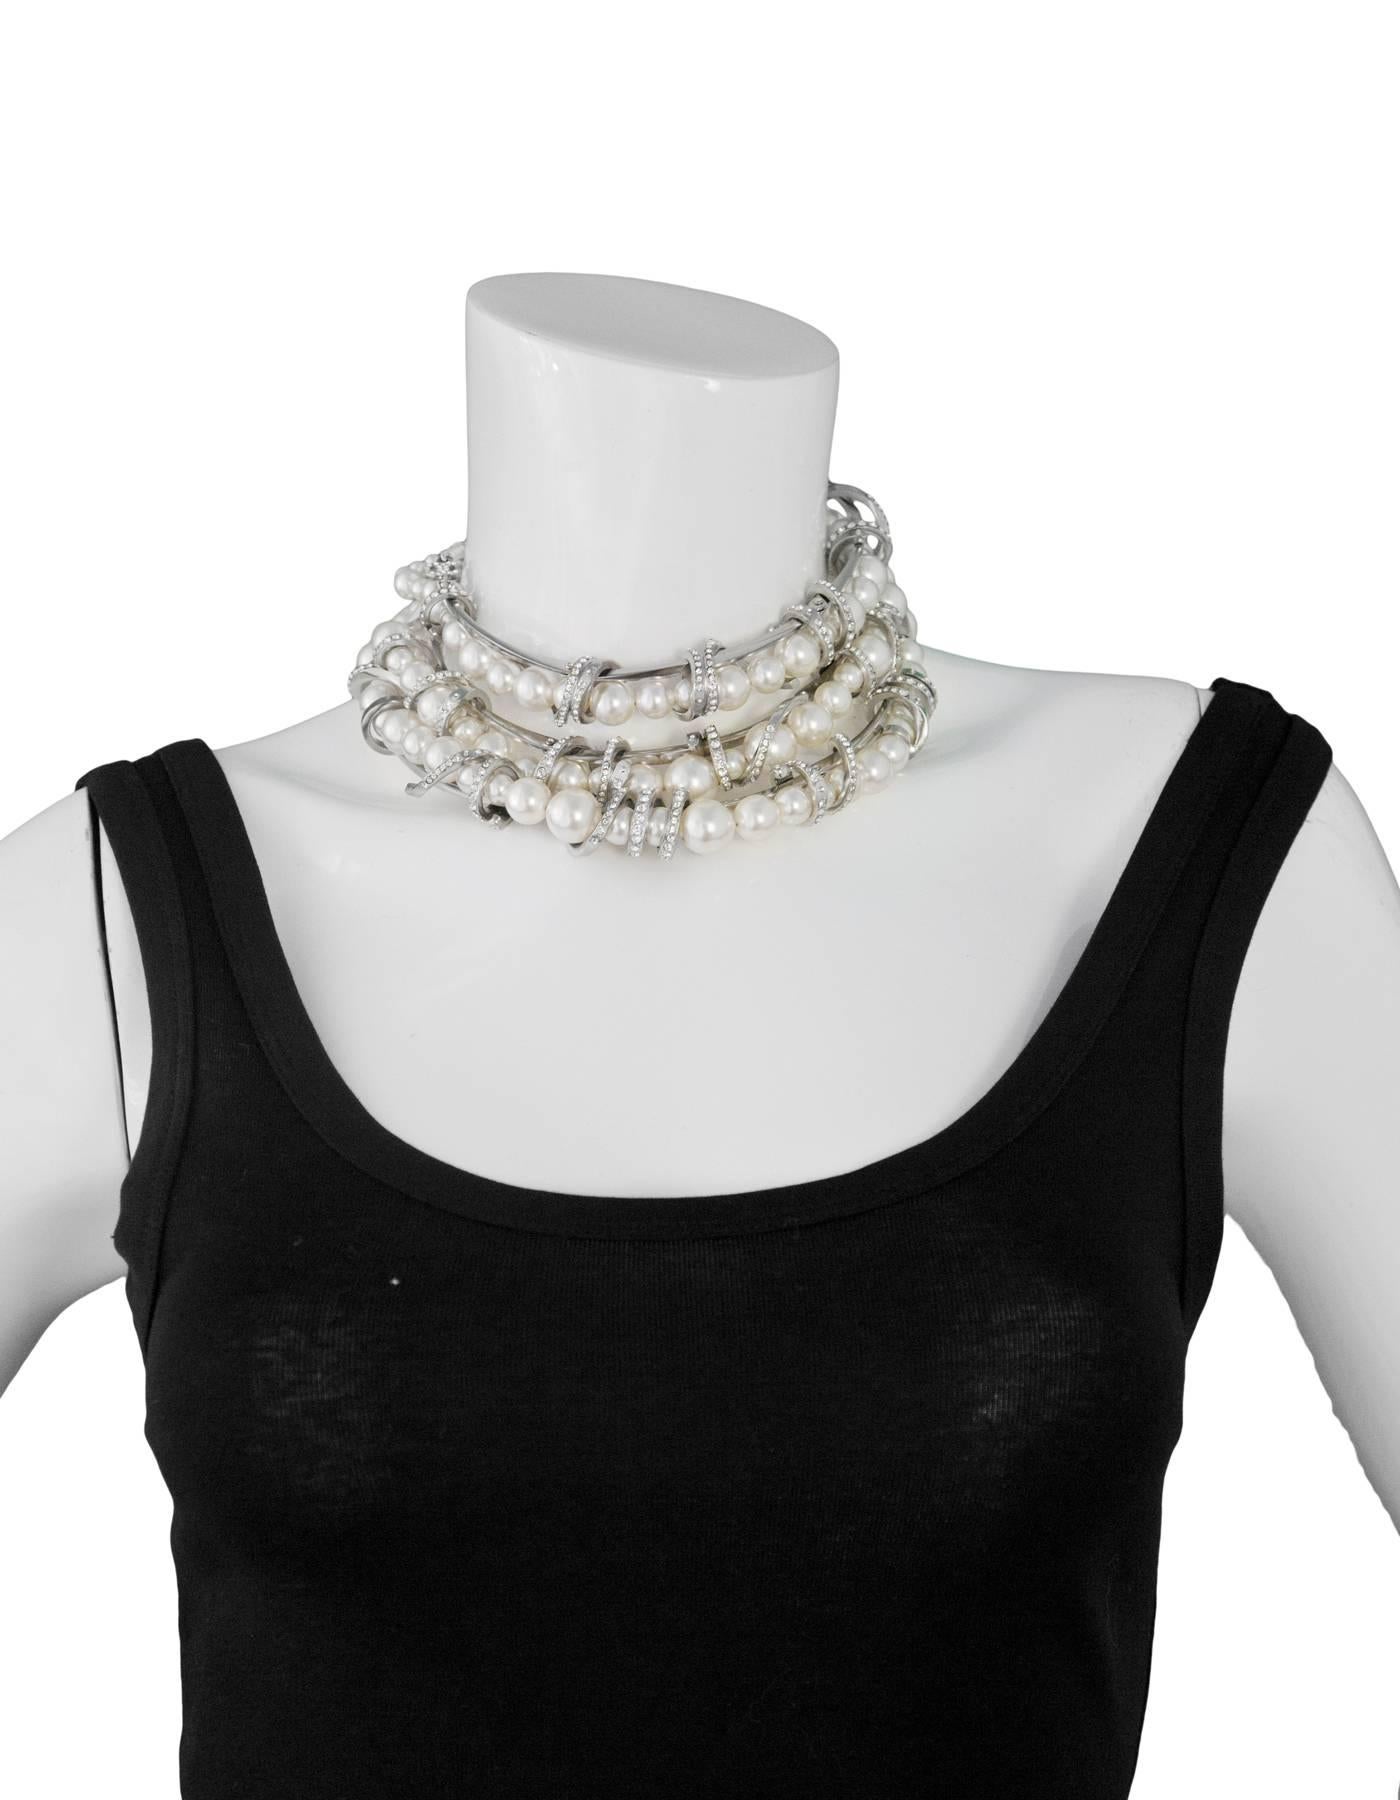 Chanel Three-Strand Graduated Pearl & Crystal Coil Choker
Features pave crystal metal coils

Made In: France
Year Of Production: 2016
Color: Ivory, silver
Materials: Faux pearl, metal, crystal
Closure: Lobster claw closure
Stamp: Chanel 16 CC S Made